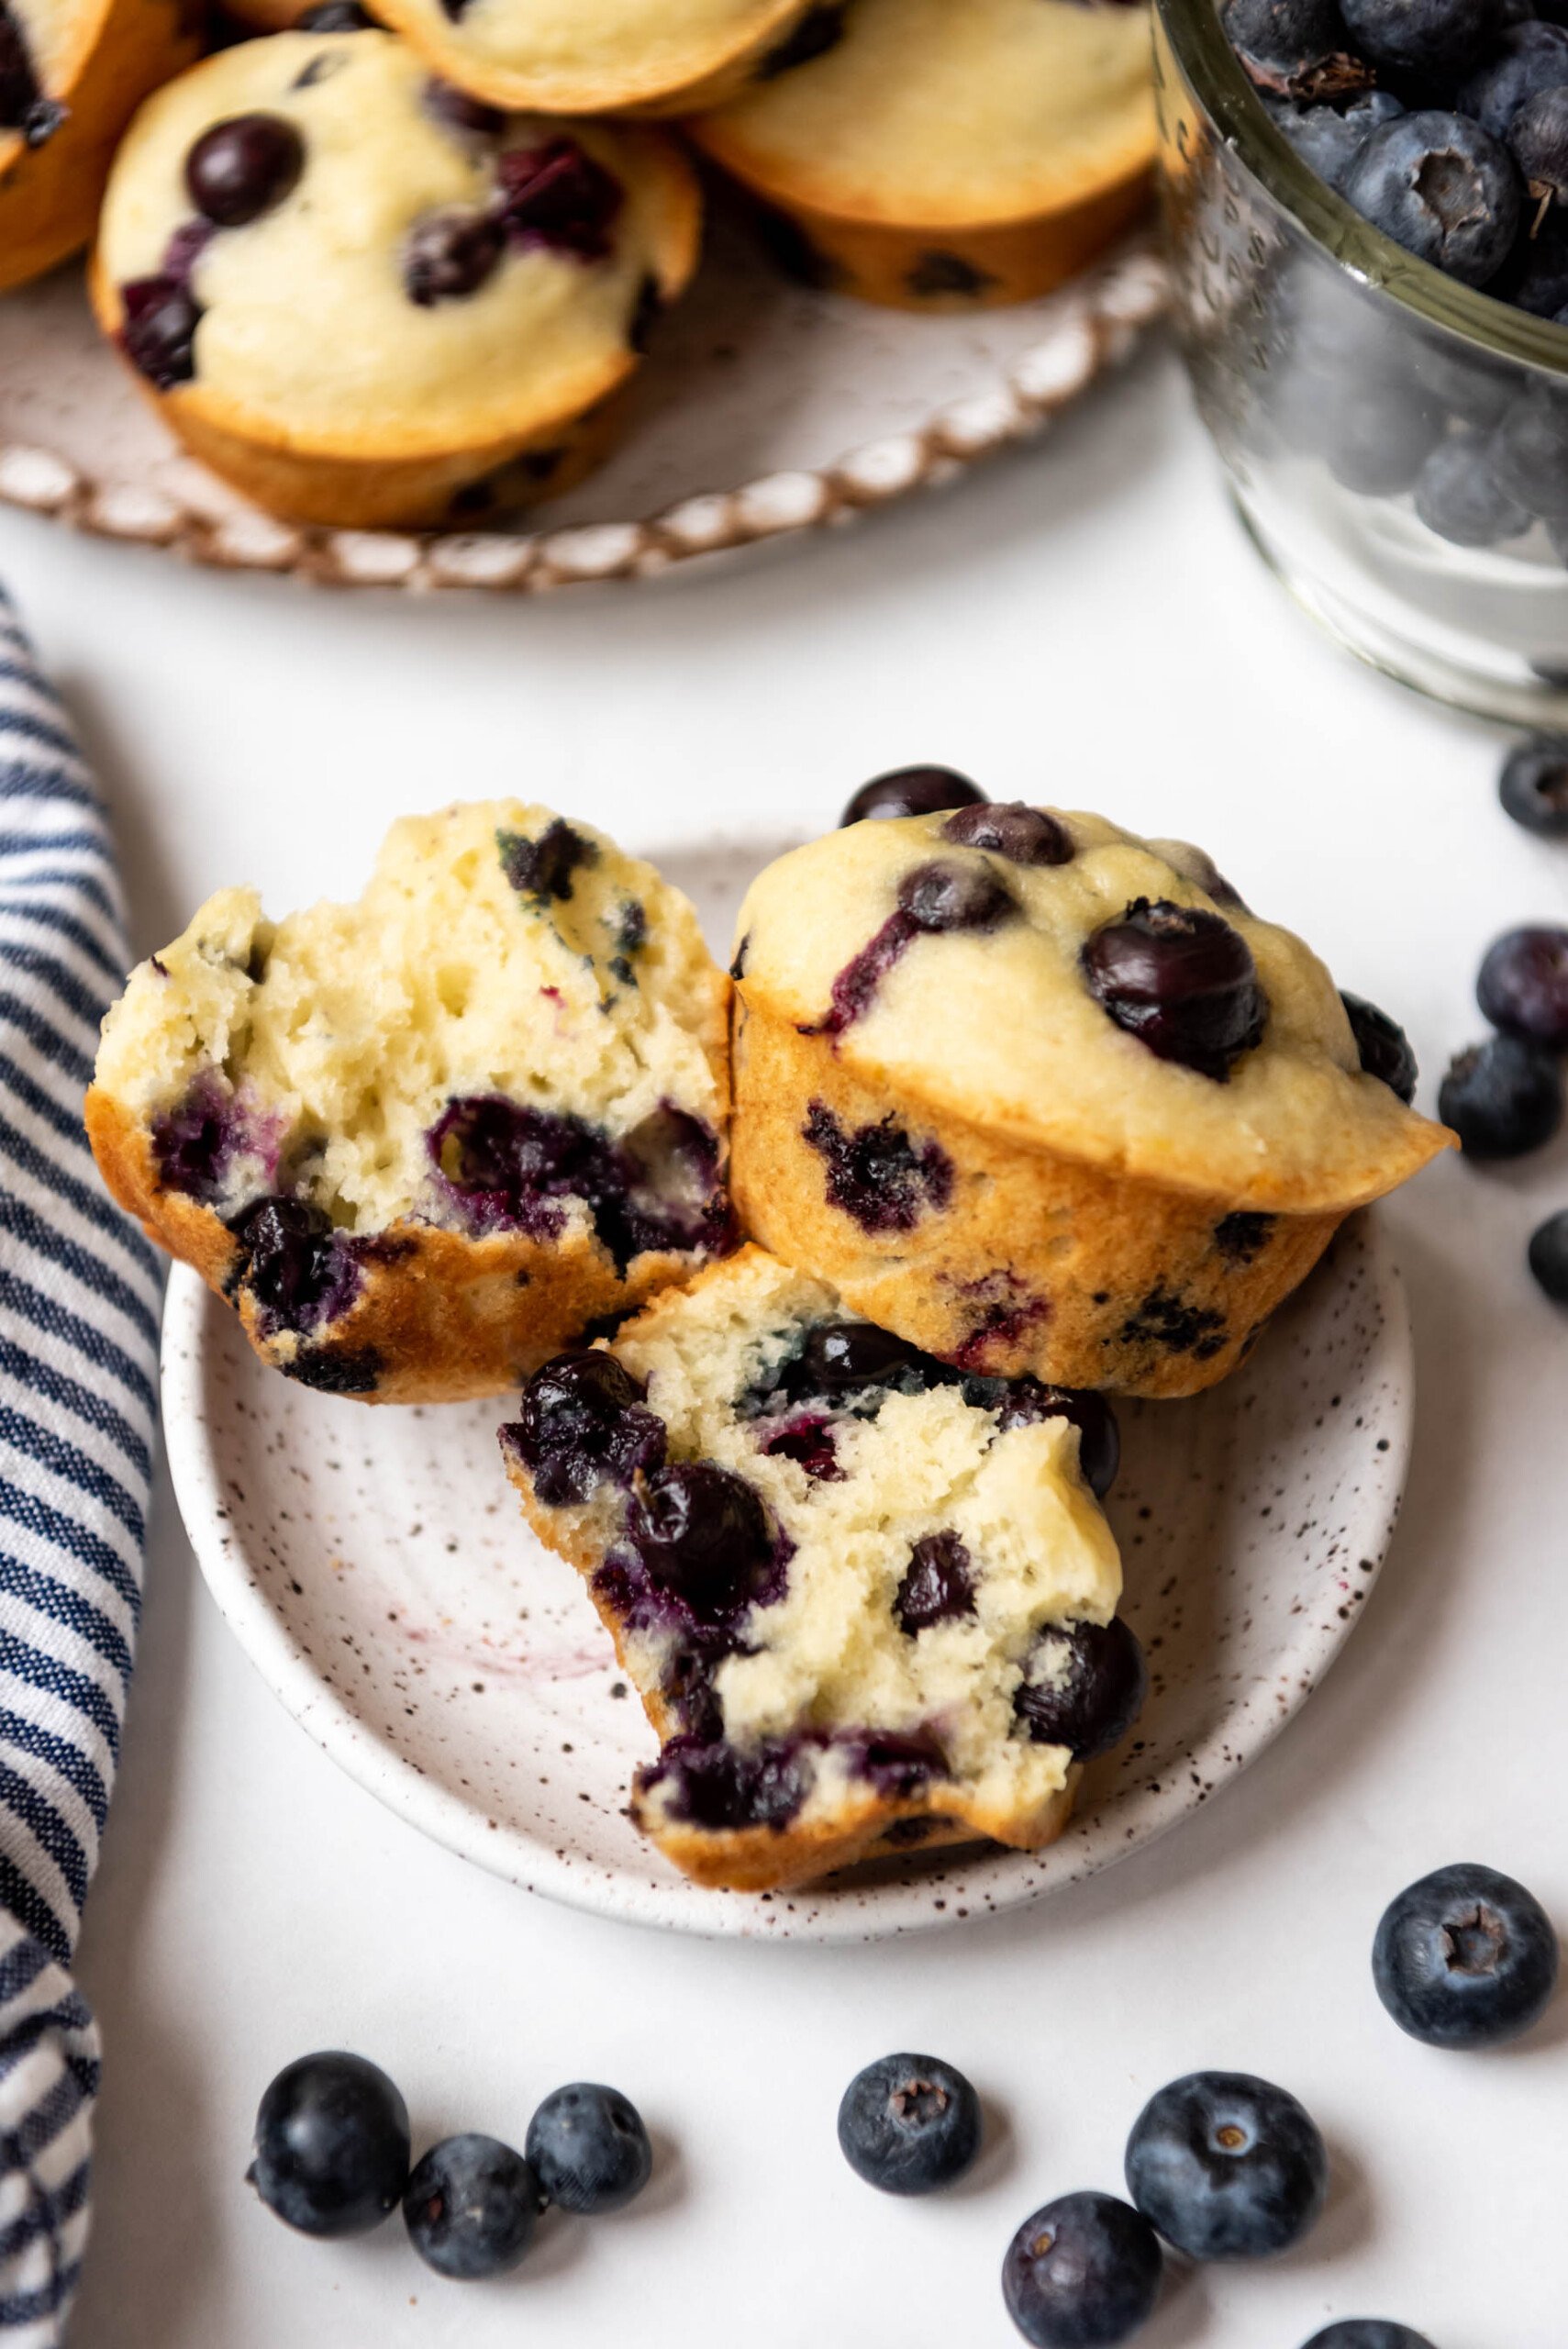 Two blueberry muffins on a plate in front of some fresh blueberries with one of the muffins torn in half to show the insides.